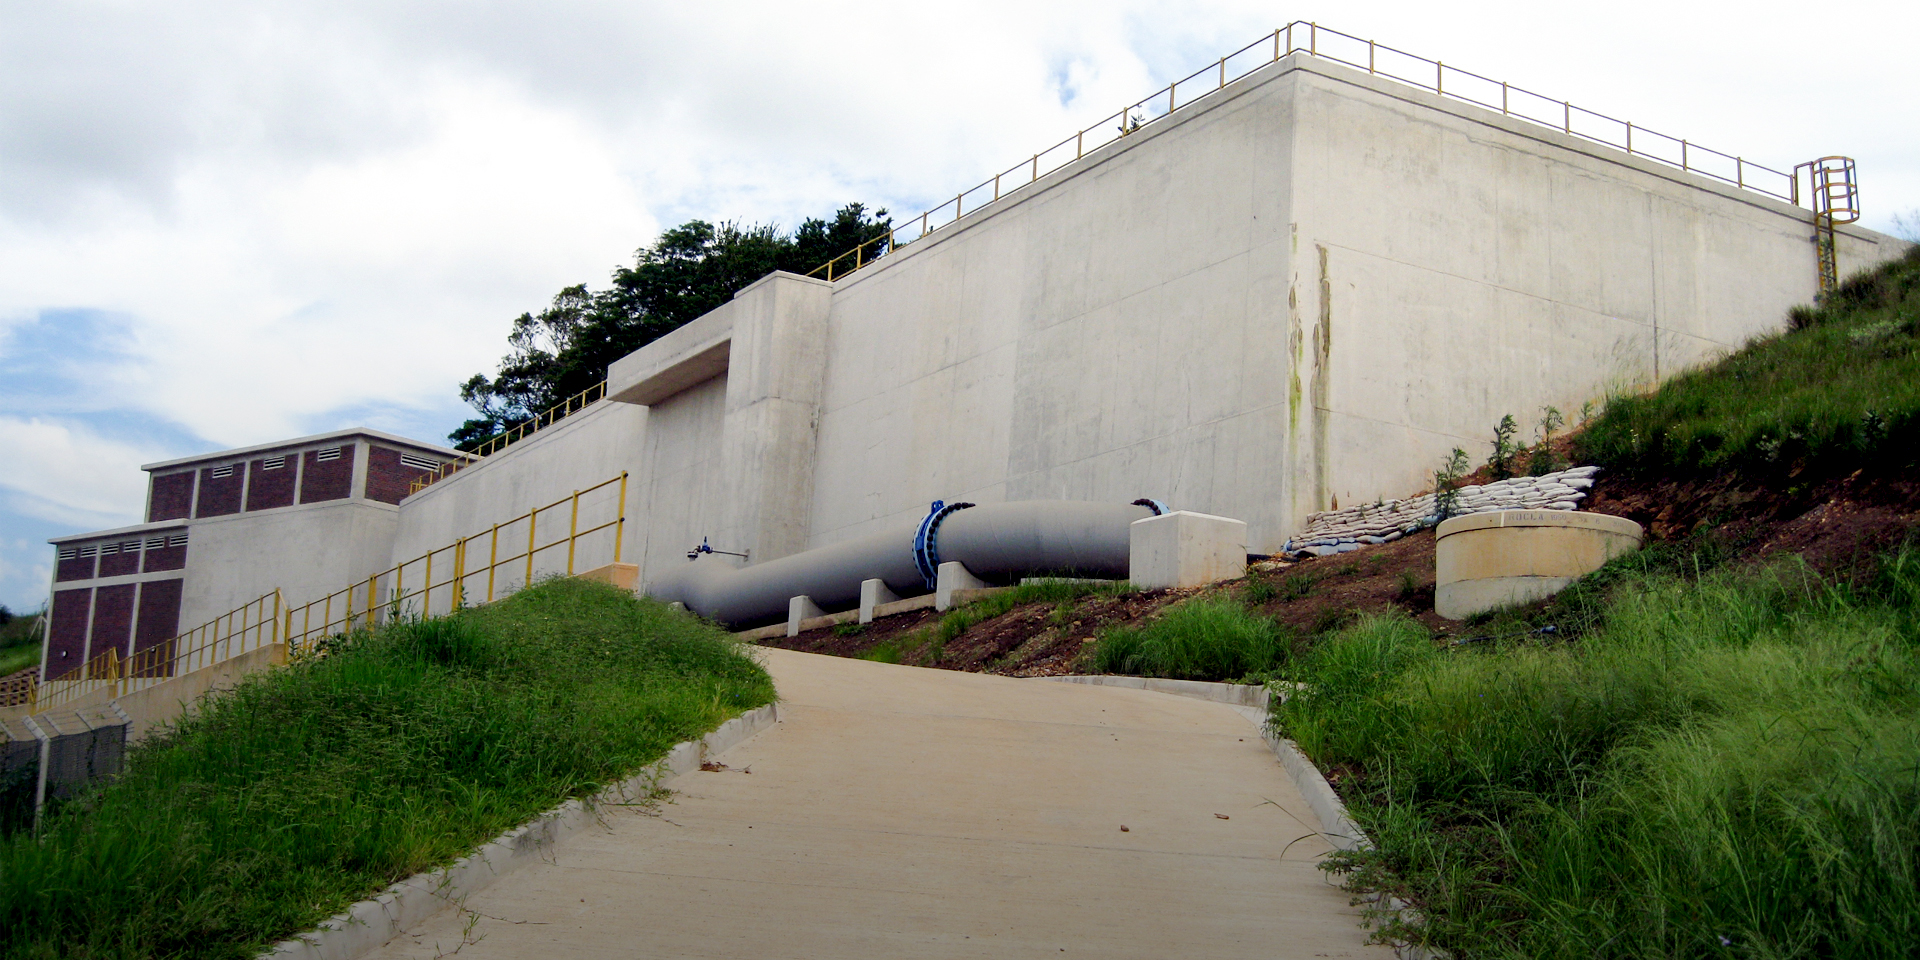 Image of a paved road going up a hill to a large water treatment building.